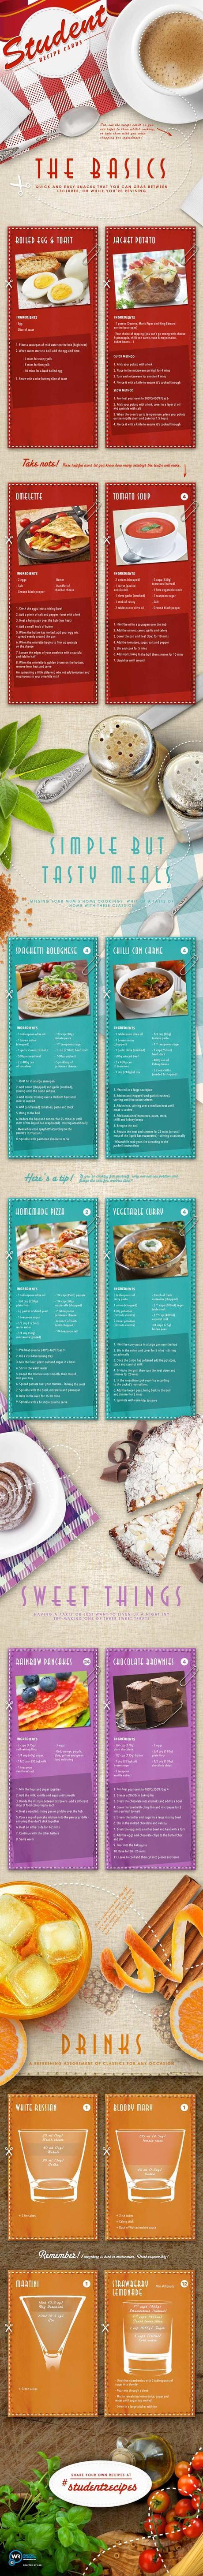 Student Recipes Infographic